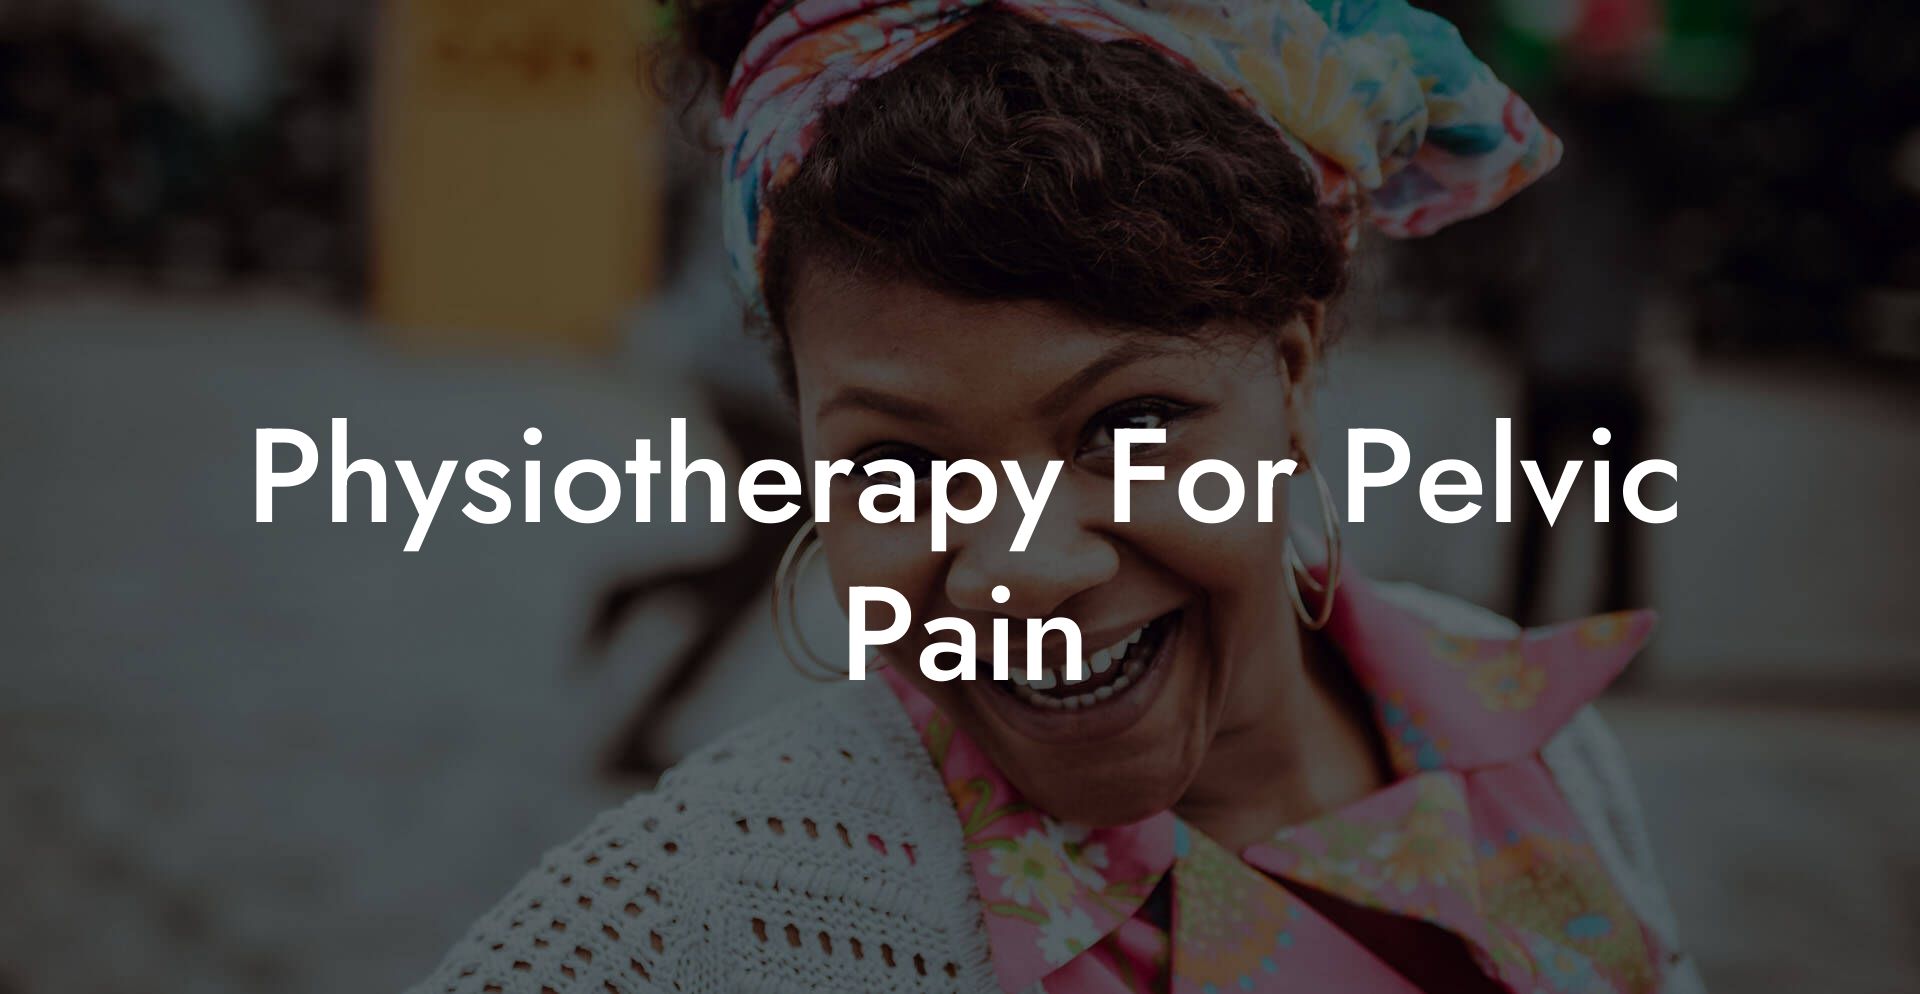 Physiotherapy For Pelvic Pain